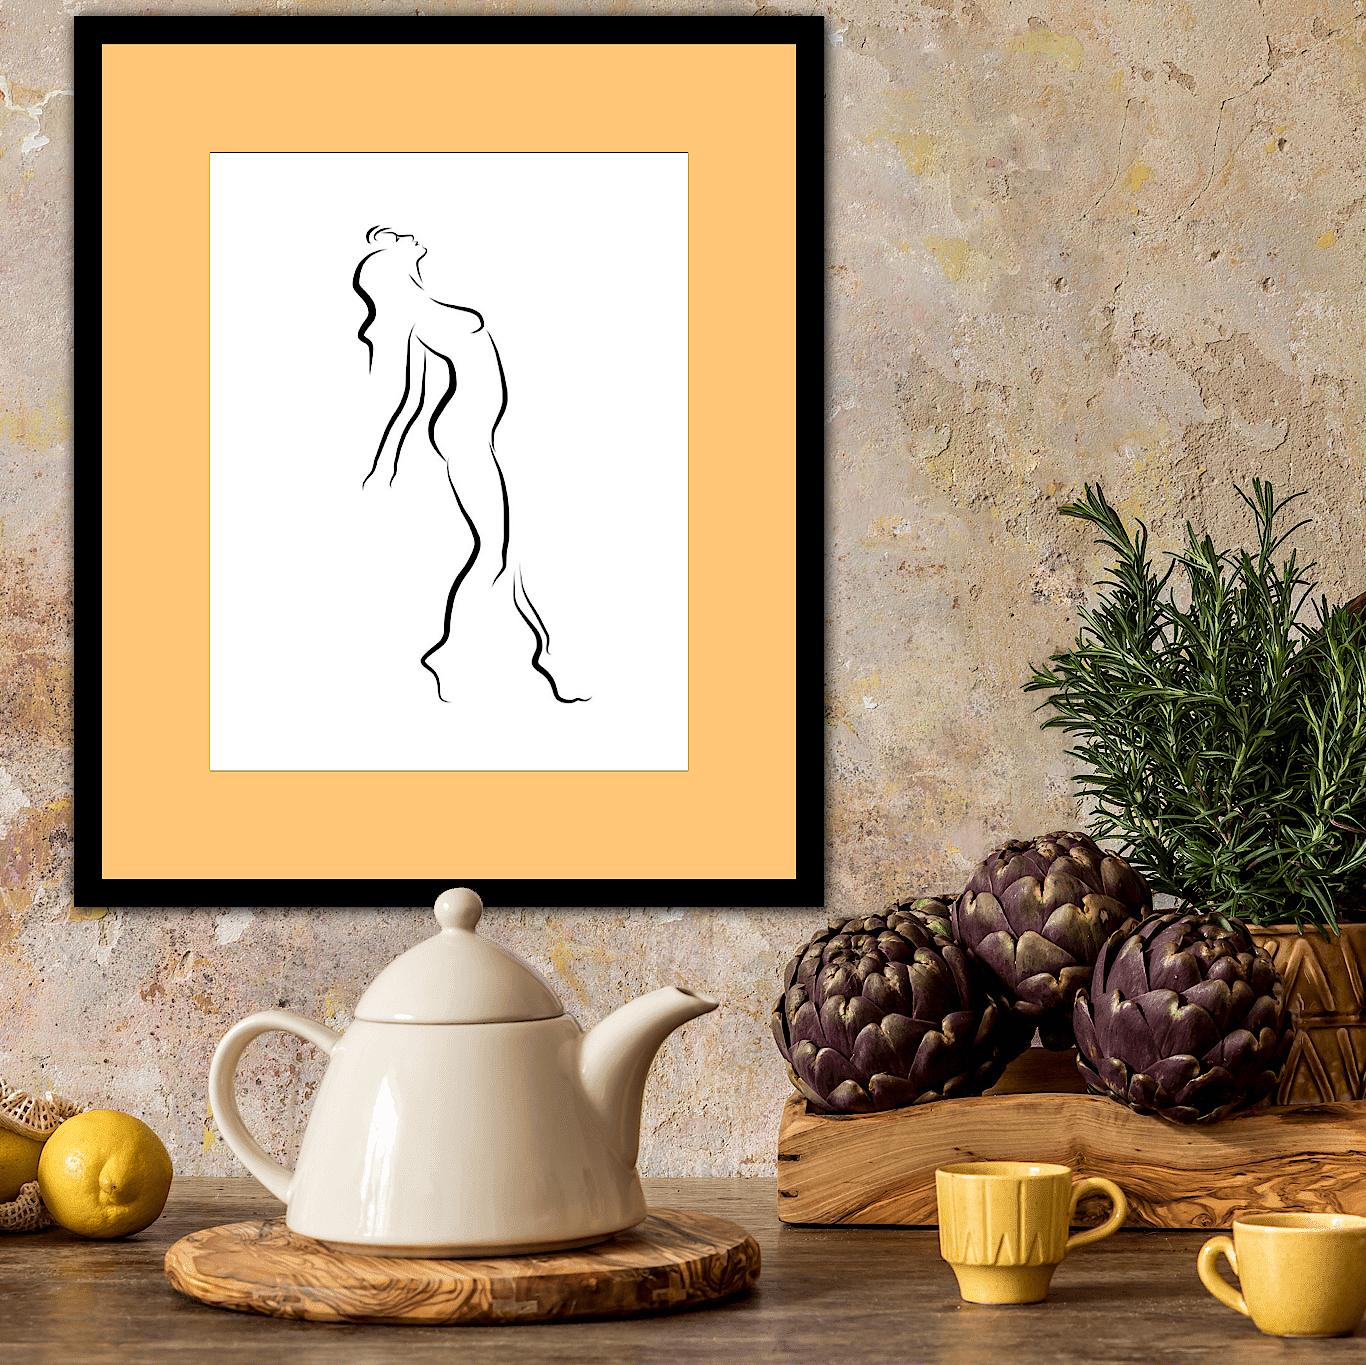 Haiku #27 - Digital Vector Drawing Leaning Female Nude Woman Figure on Table

This is a limited edition (50) digital black & white print of a standing female nude, executed in 17 vector lines. It is part of a series called Haiku, after the style of